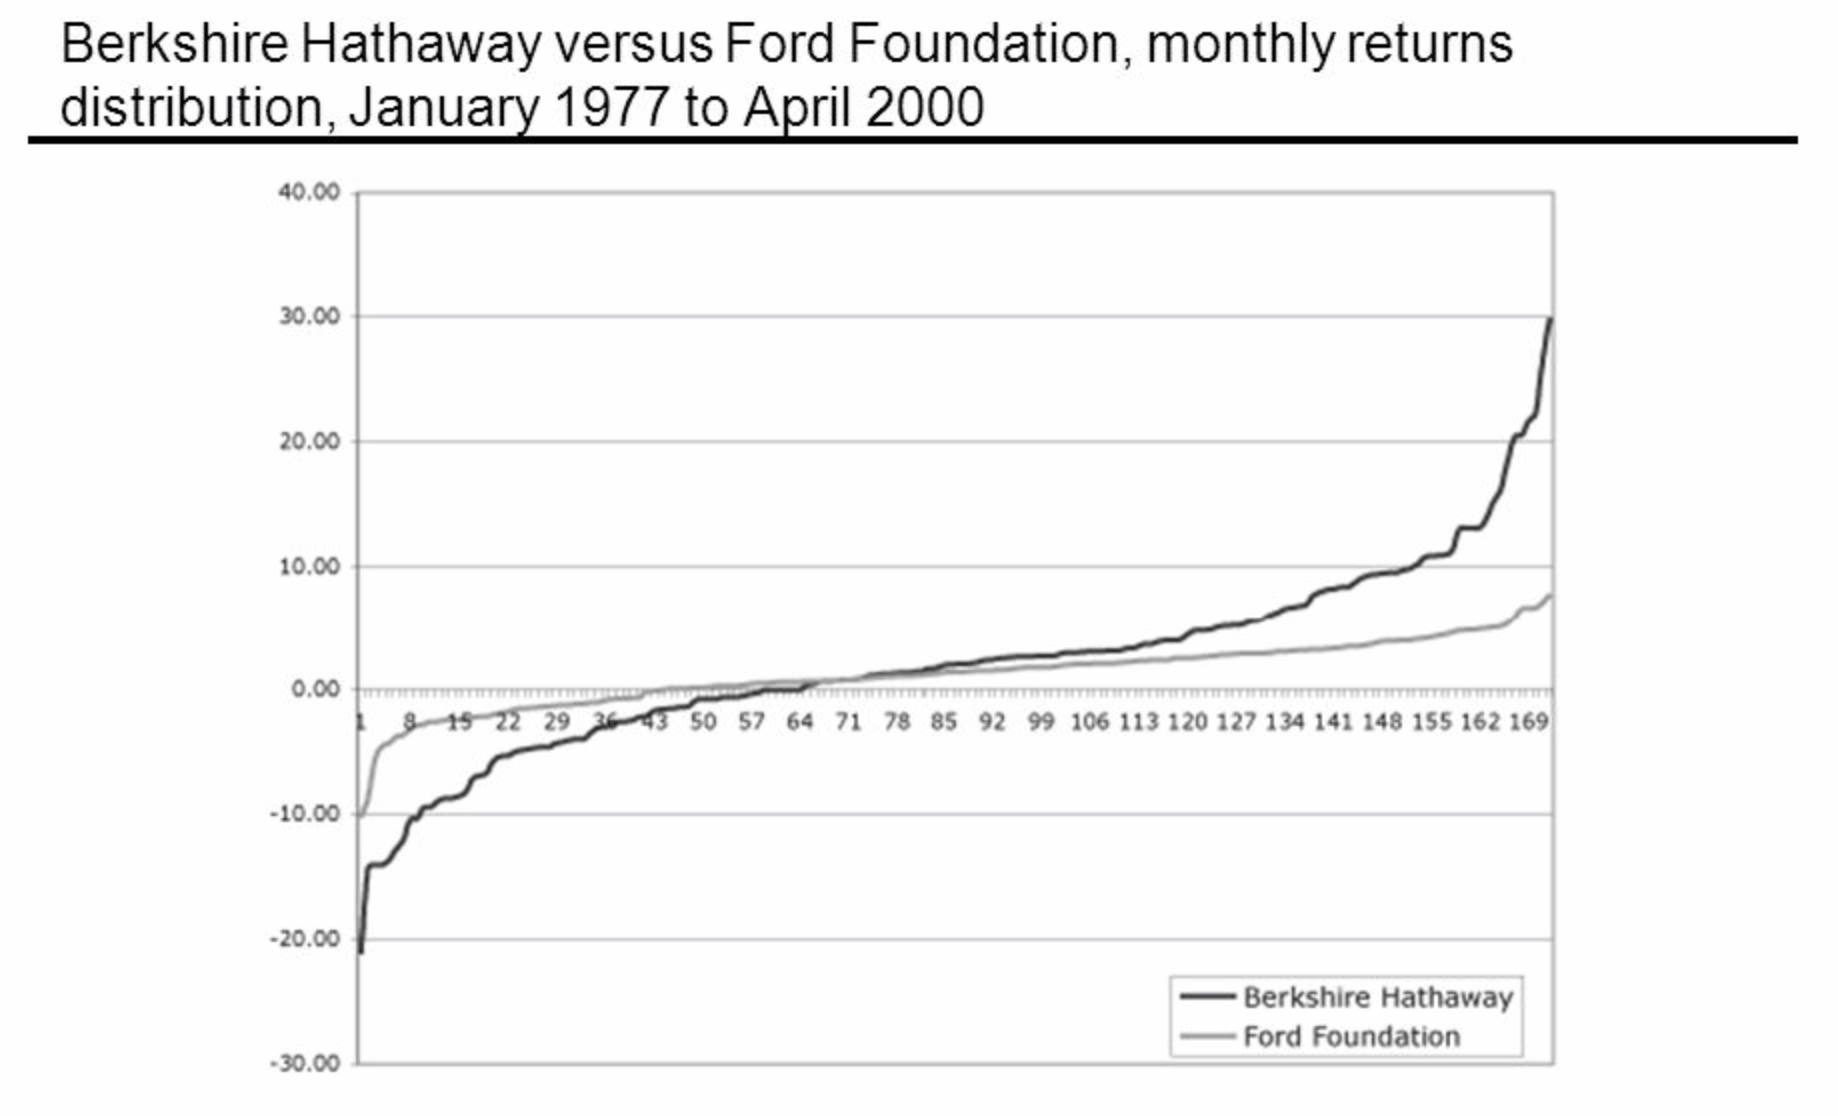 Ford and Berkshire Hathaway, Monthly Returns Distribution